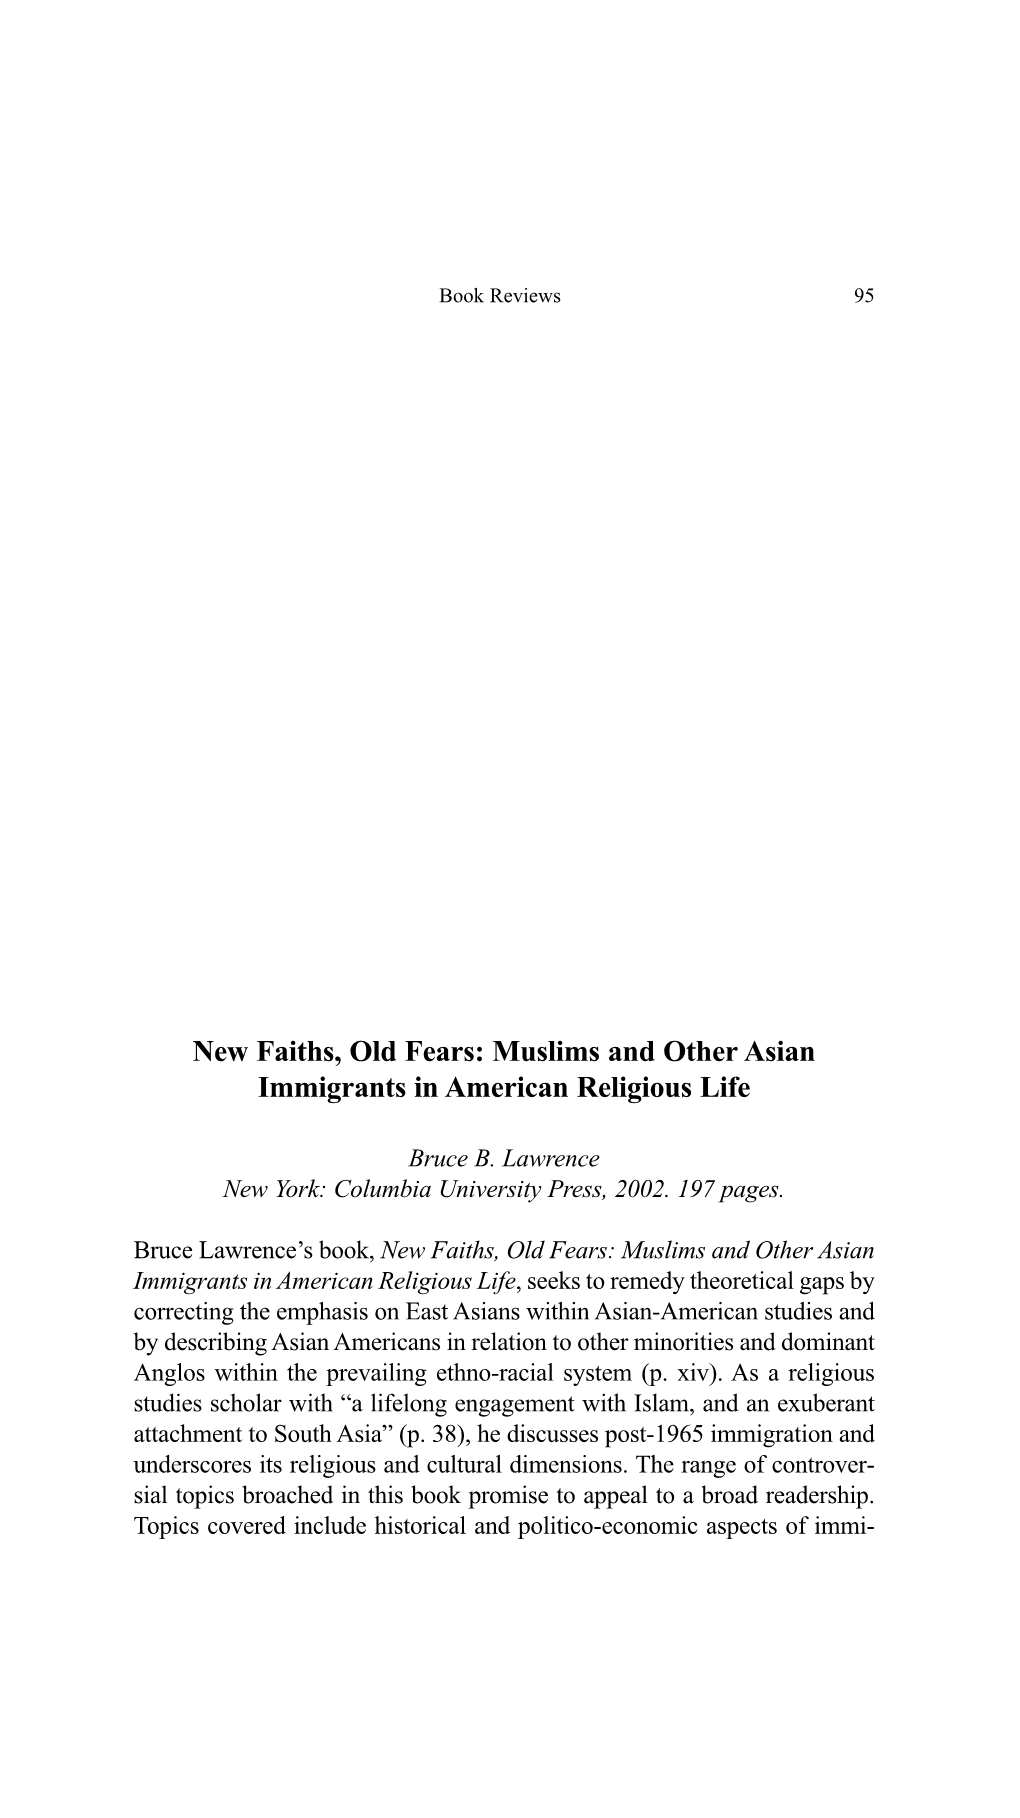 Muslims and Other Asian Immigrants in American Religious Life